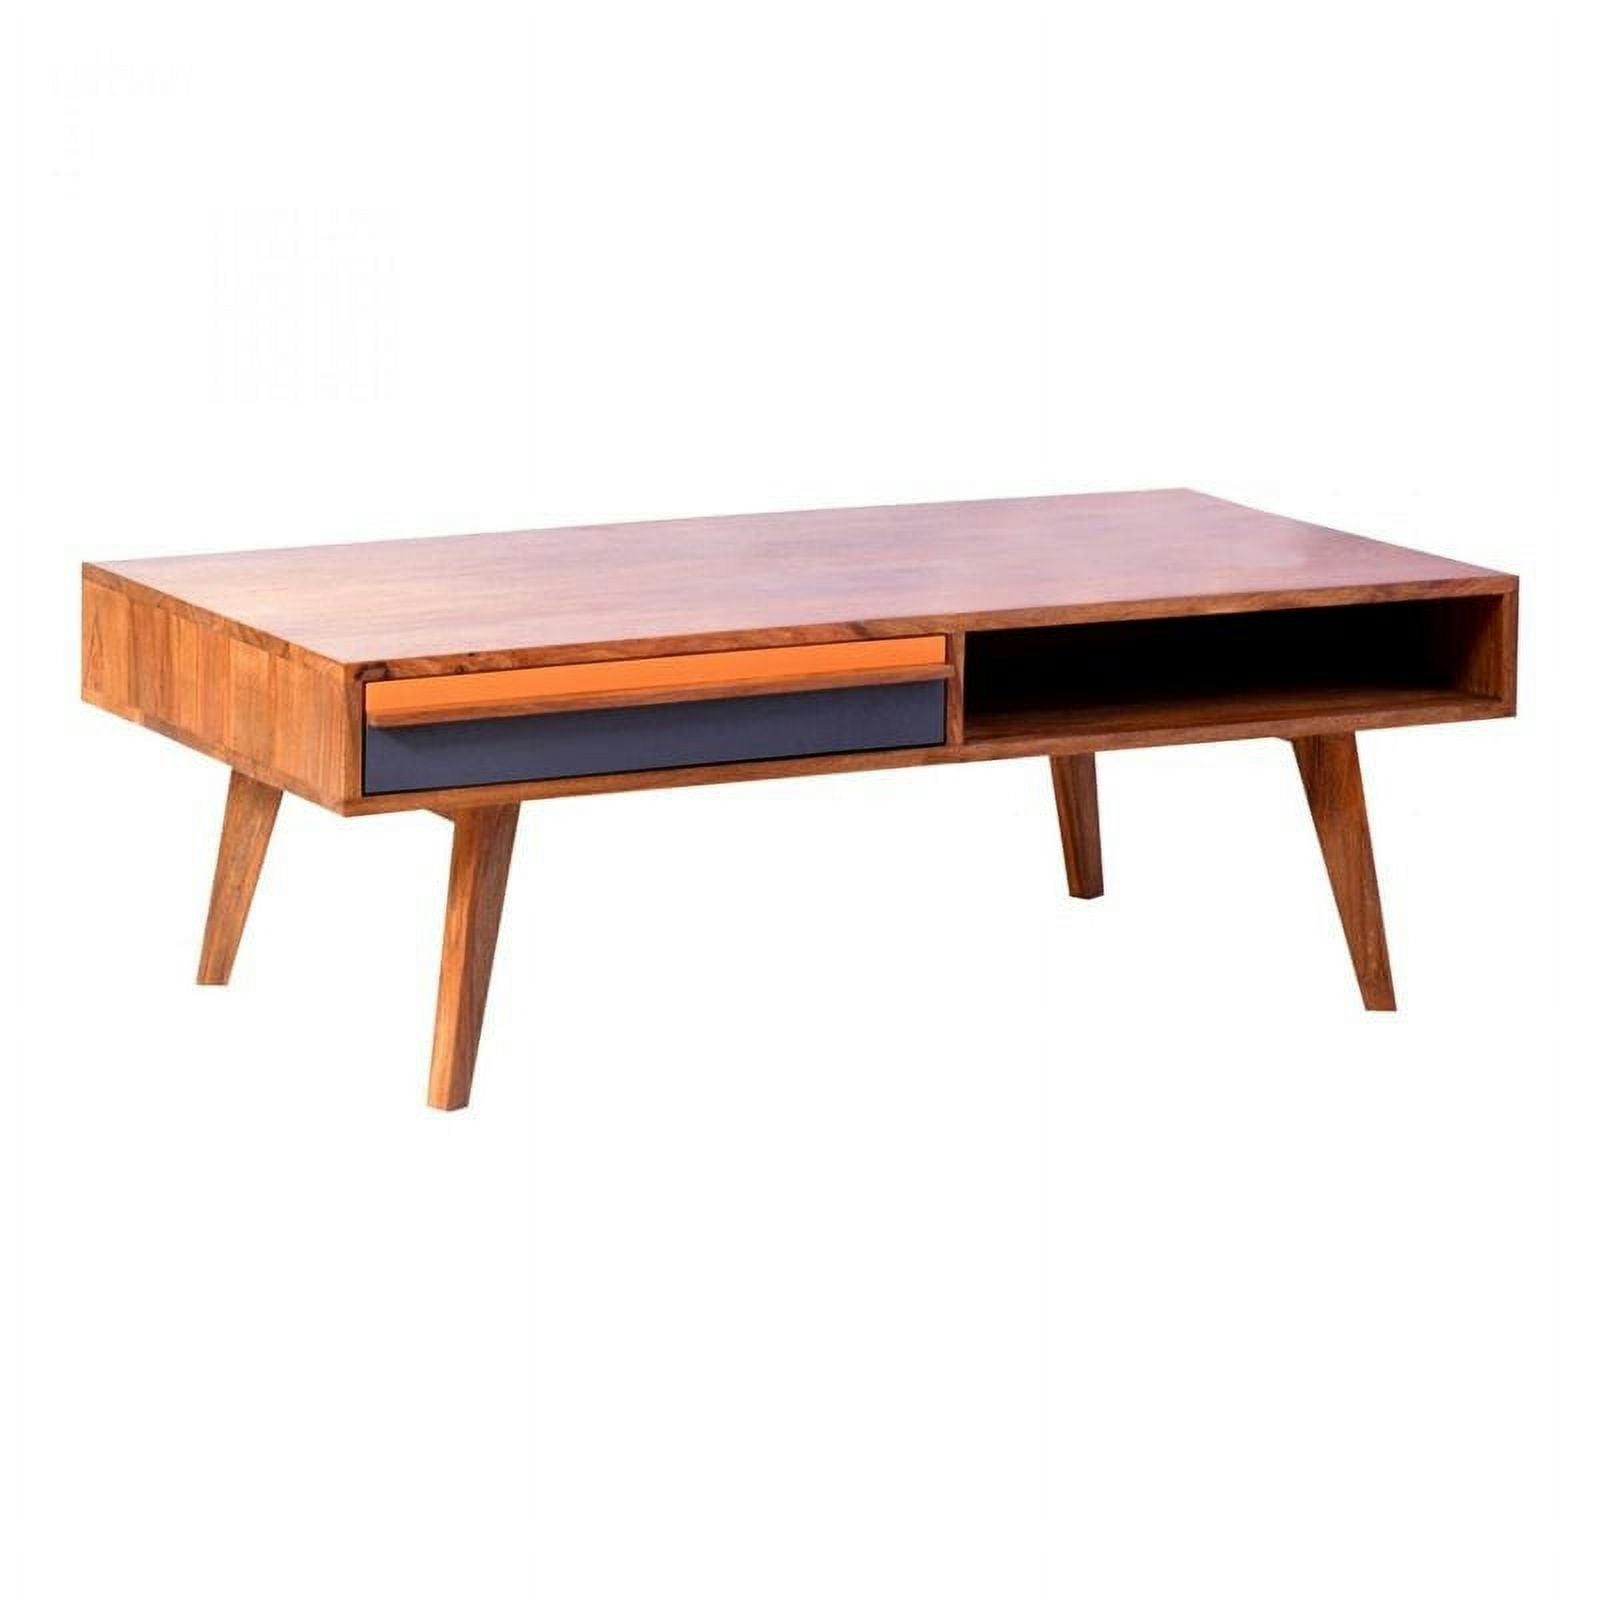 Bliss Mid Century Modern Sheesham Wood Coffee Table with Storage